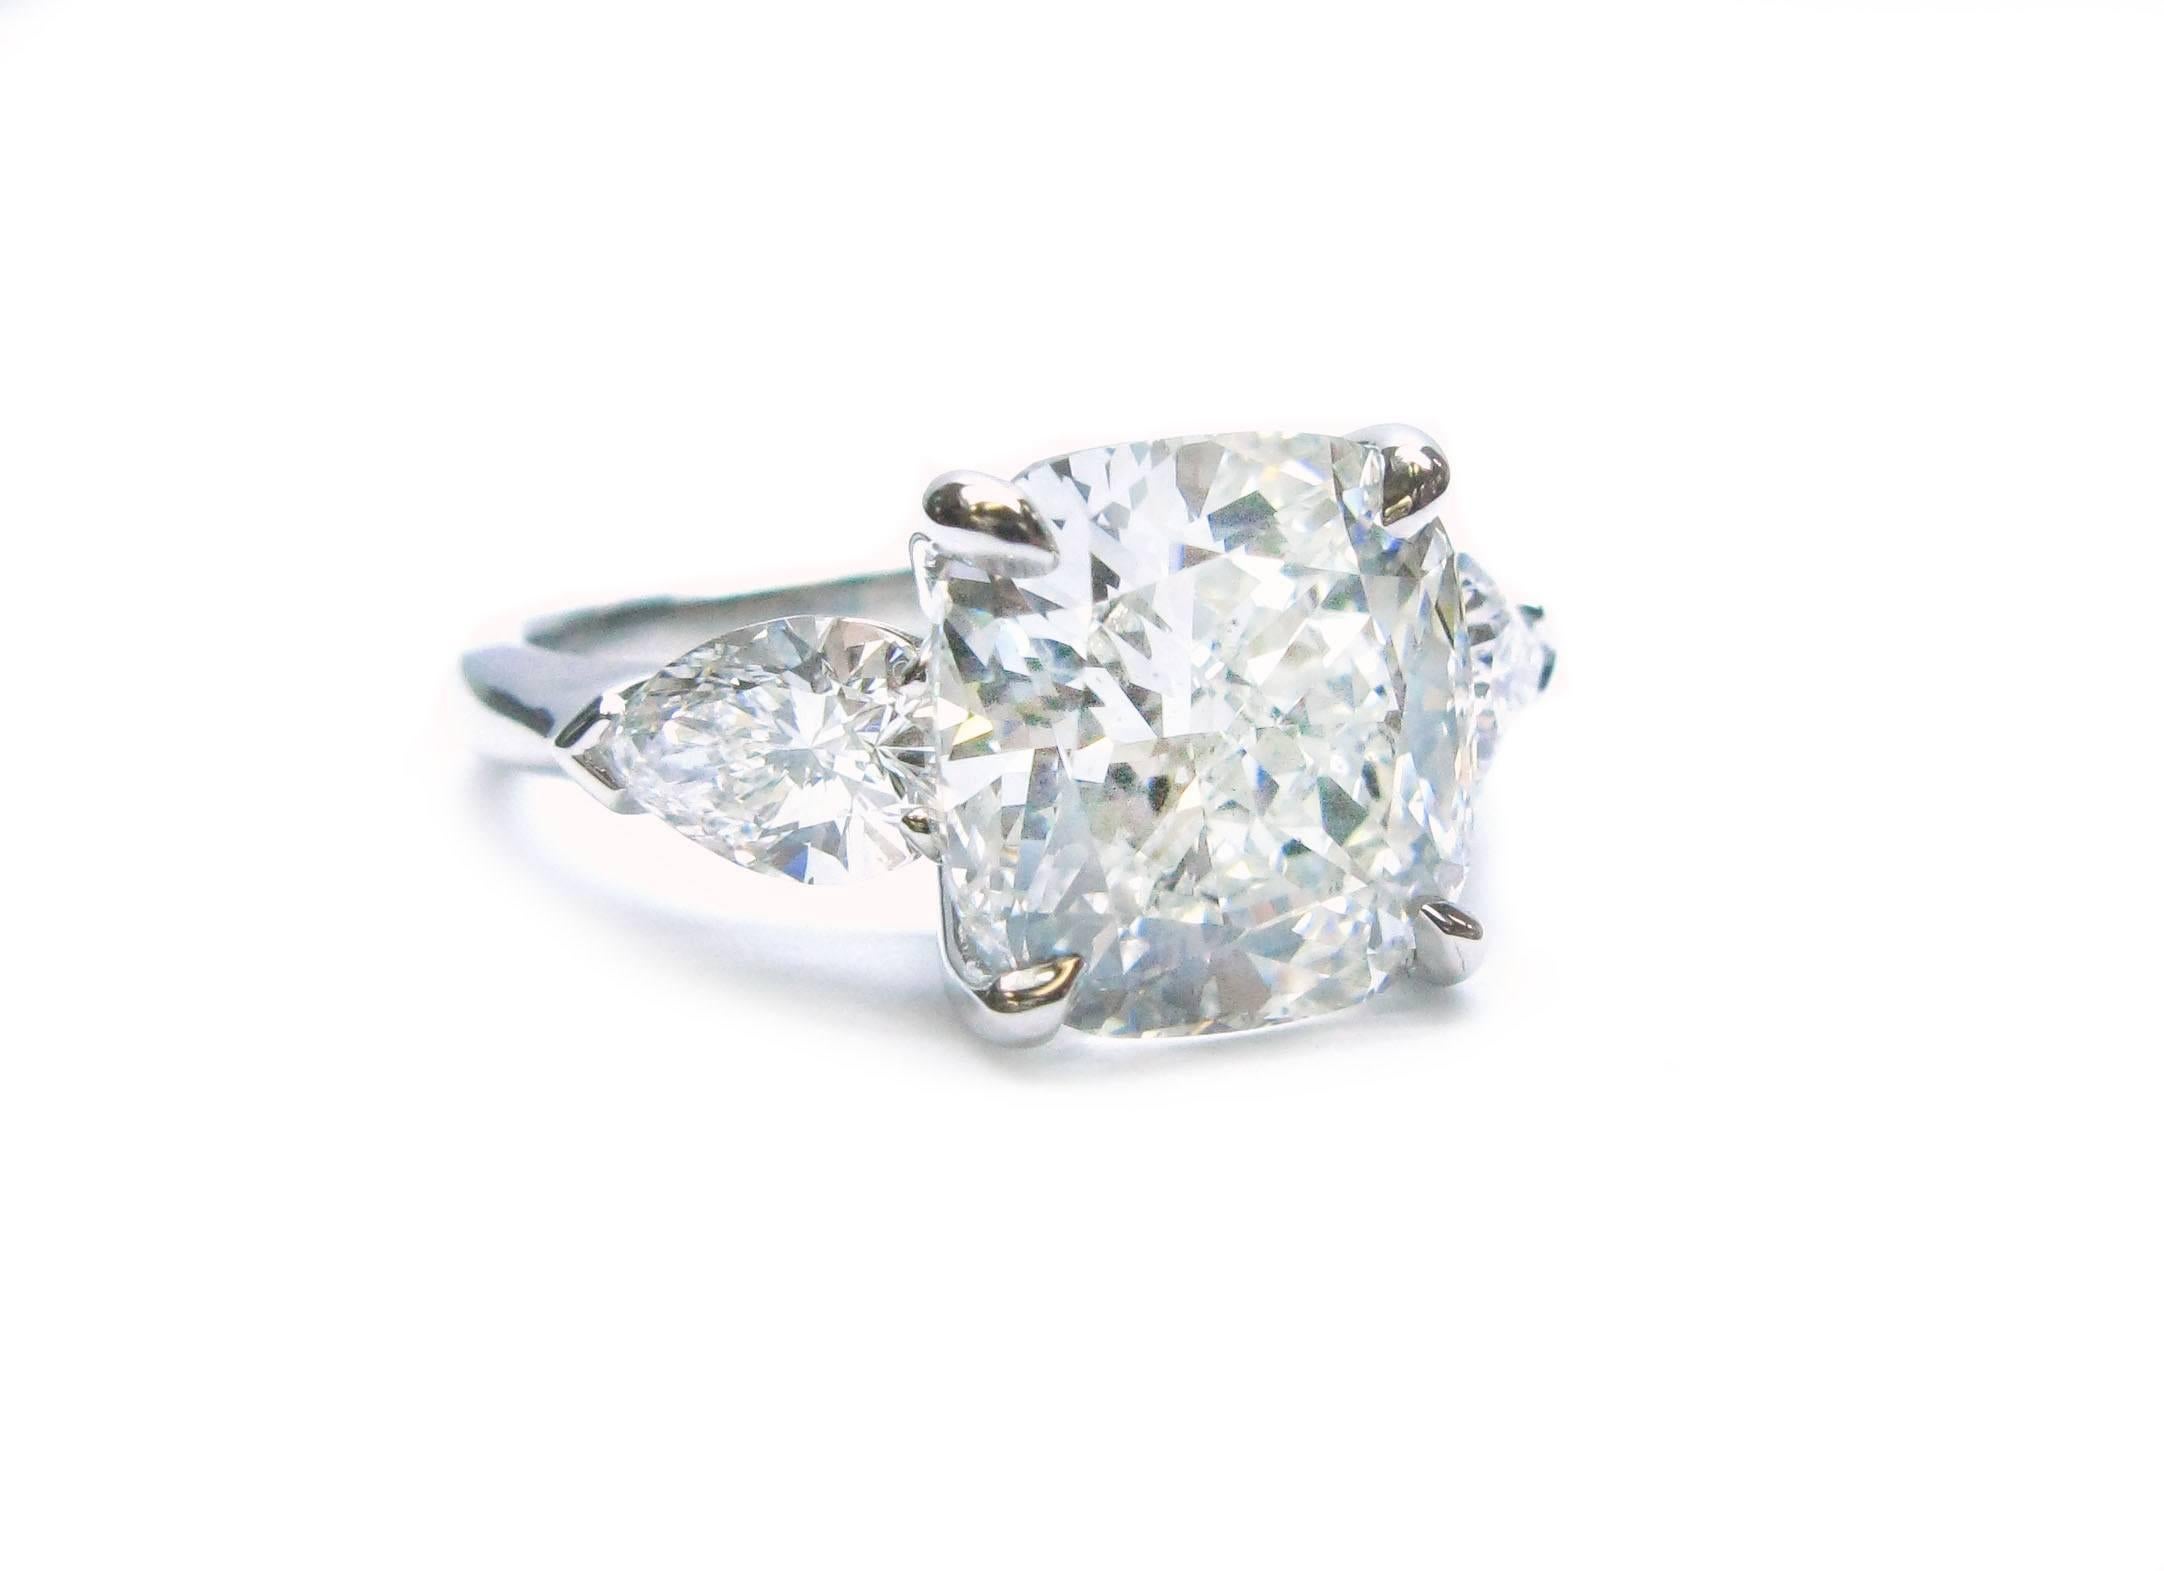 This spectacular handmade platinum ring features a GIA certified, 5.05ct, H color, SI1 clarity, Cushion Modified Brilliant cut diamond center stone with approximately 1.20ctw pear shape diamond sidestones. This gorgeous ring will be the perfect